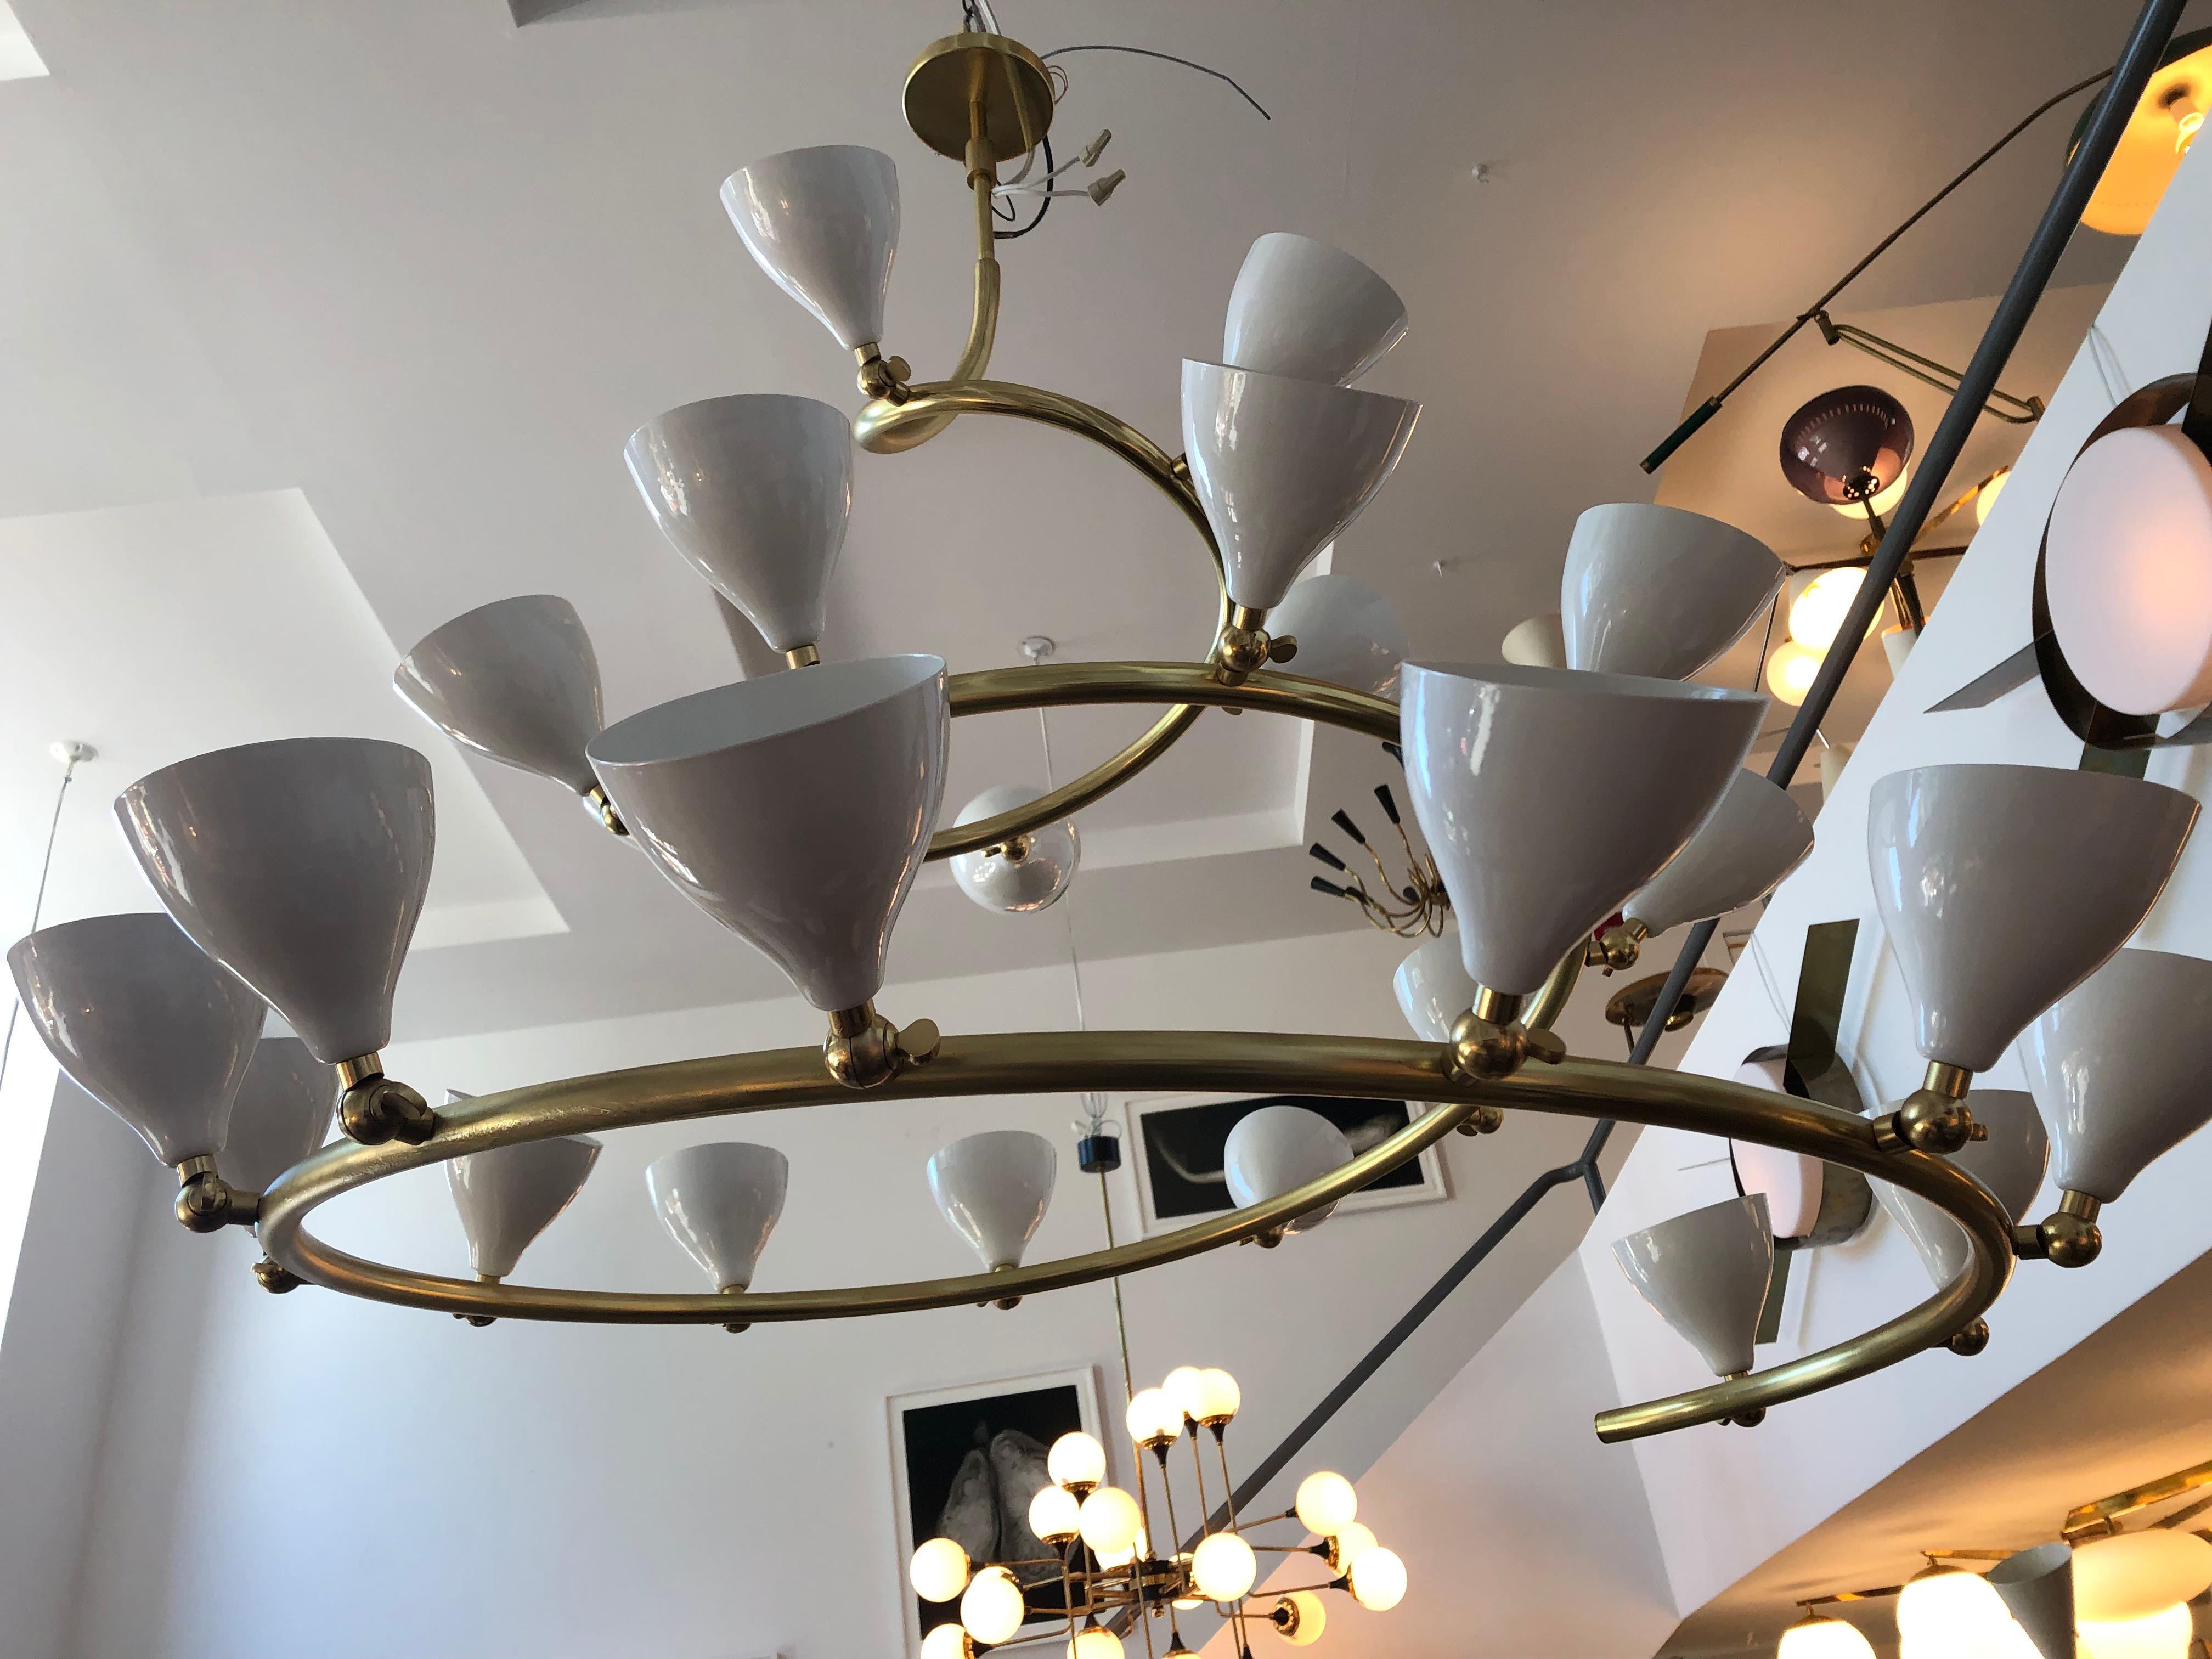 Large scale Spiral Chandelier in the style of Arteluce, inspired by Gino Sarfatti's model 2040 (1948).
This chandelier features 23 lights with off-white lacquered cup reflectors with adjustable ball joints uniquely mounted on 3/4